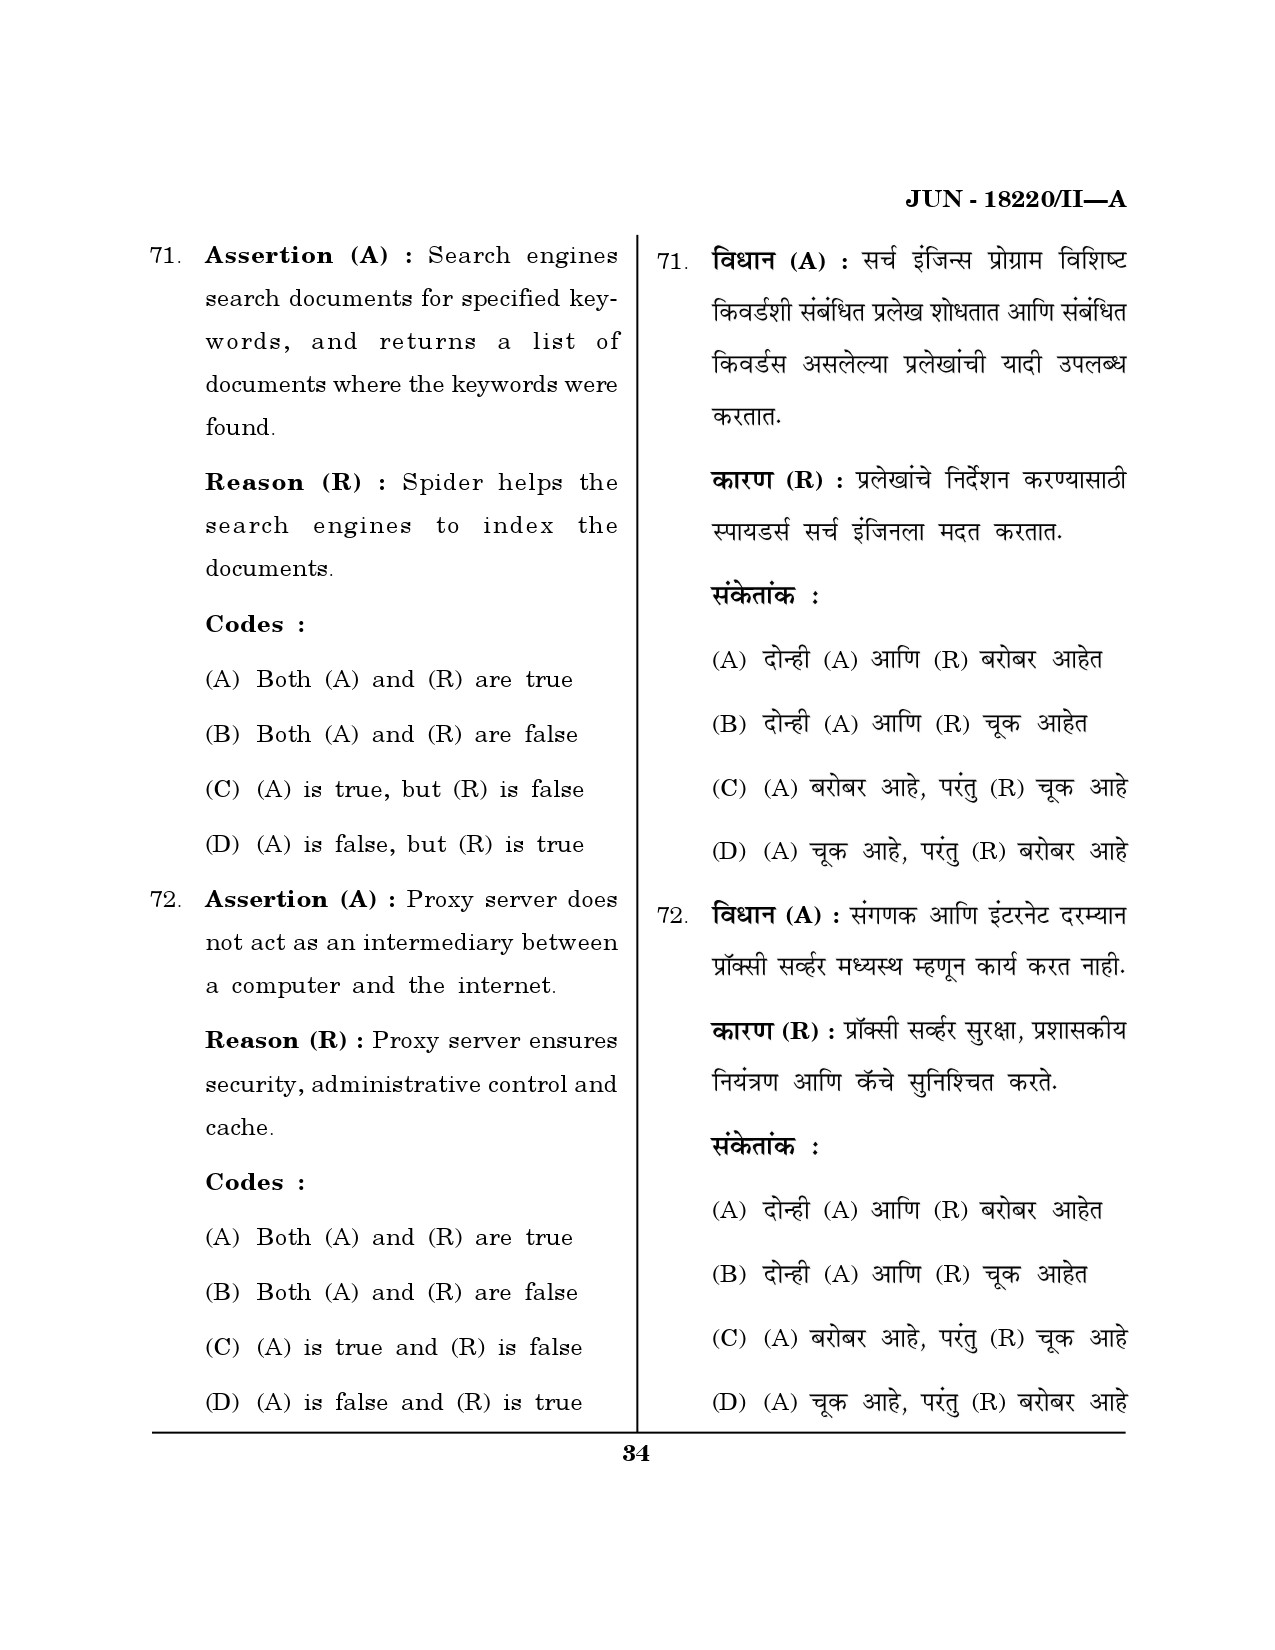 Maharashtra SET Library Information Science Question Paper II June 2020 33